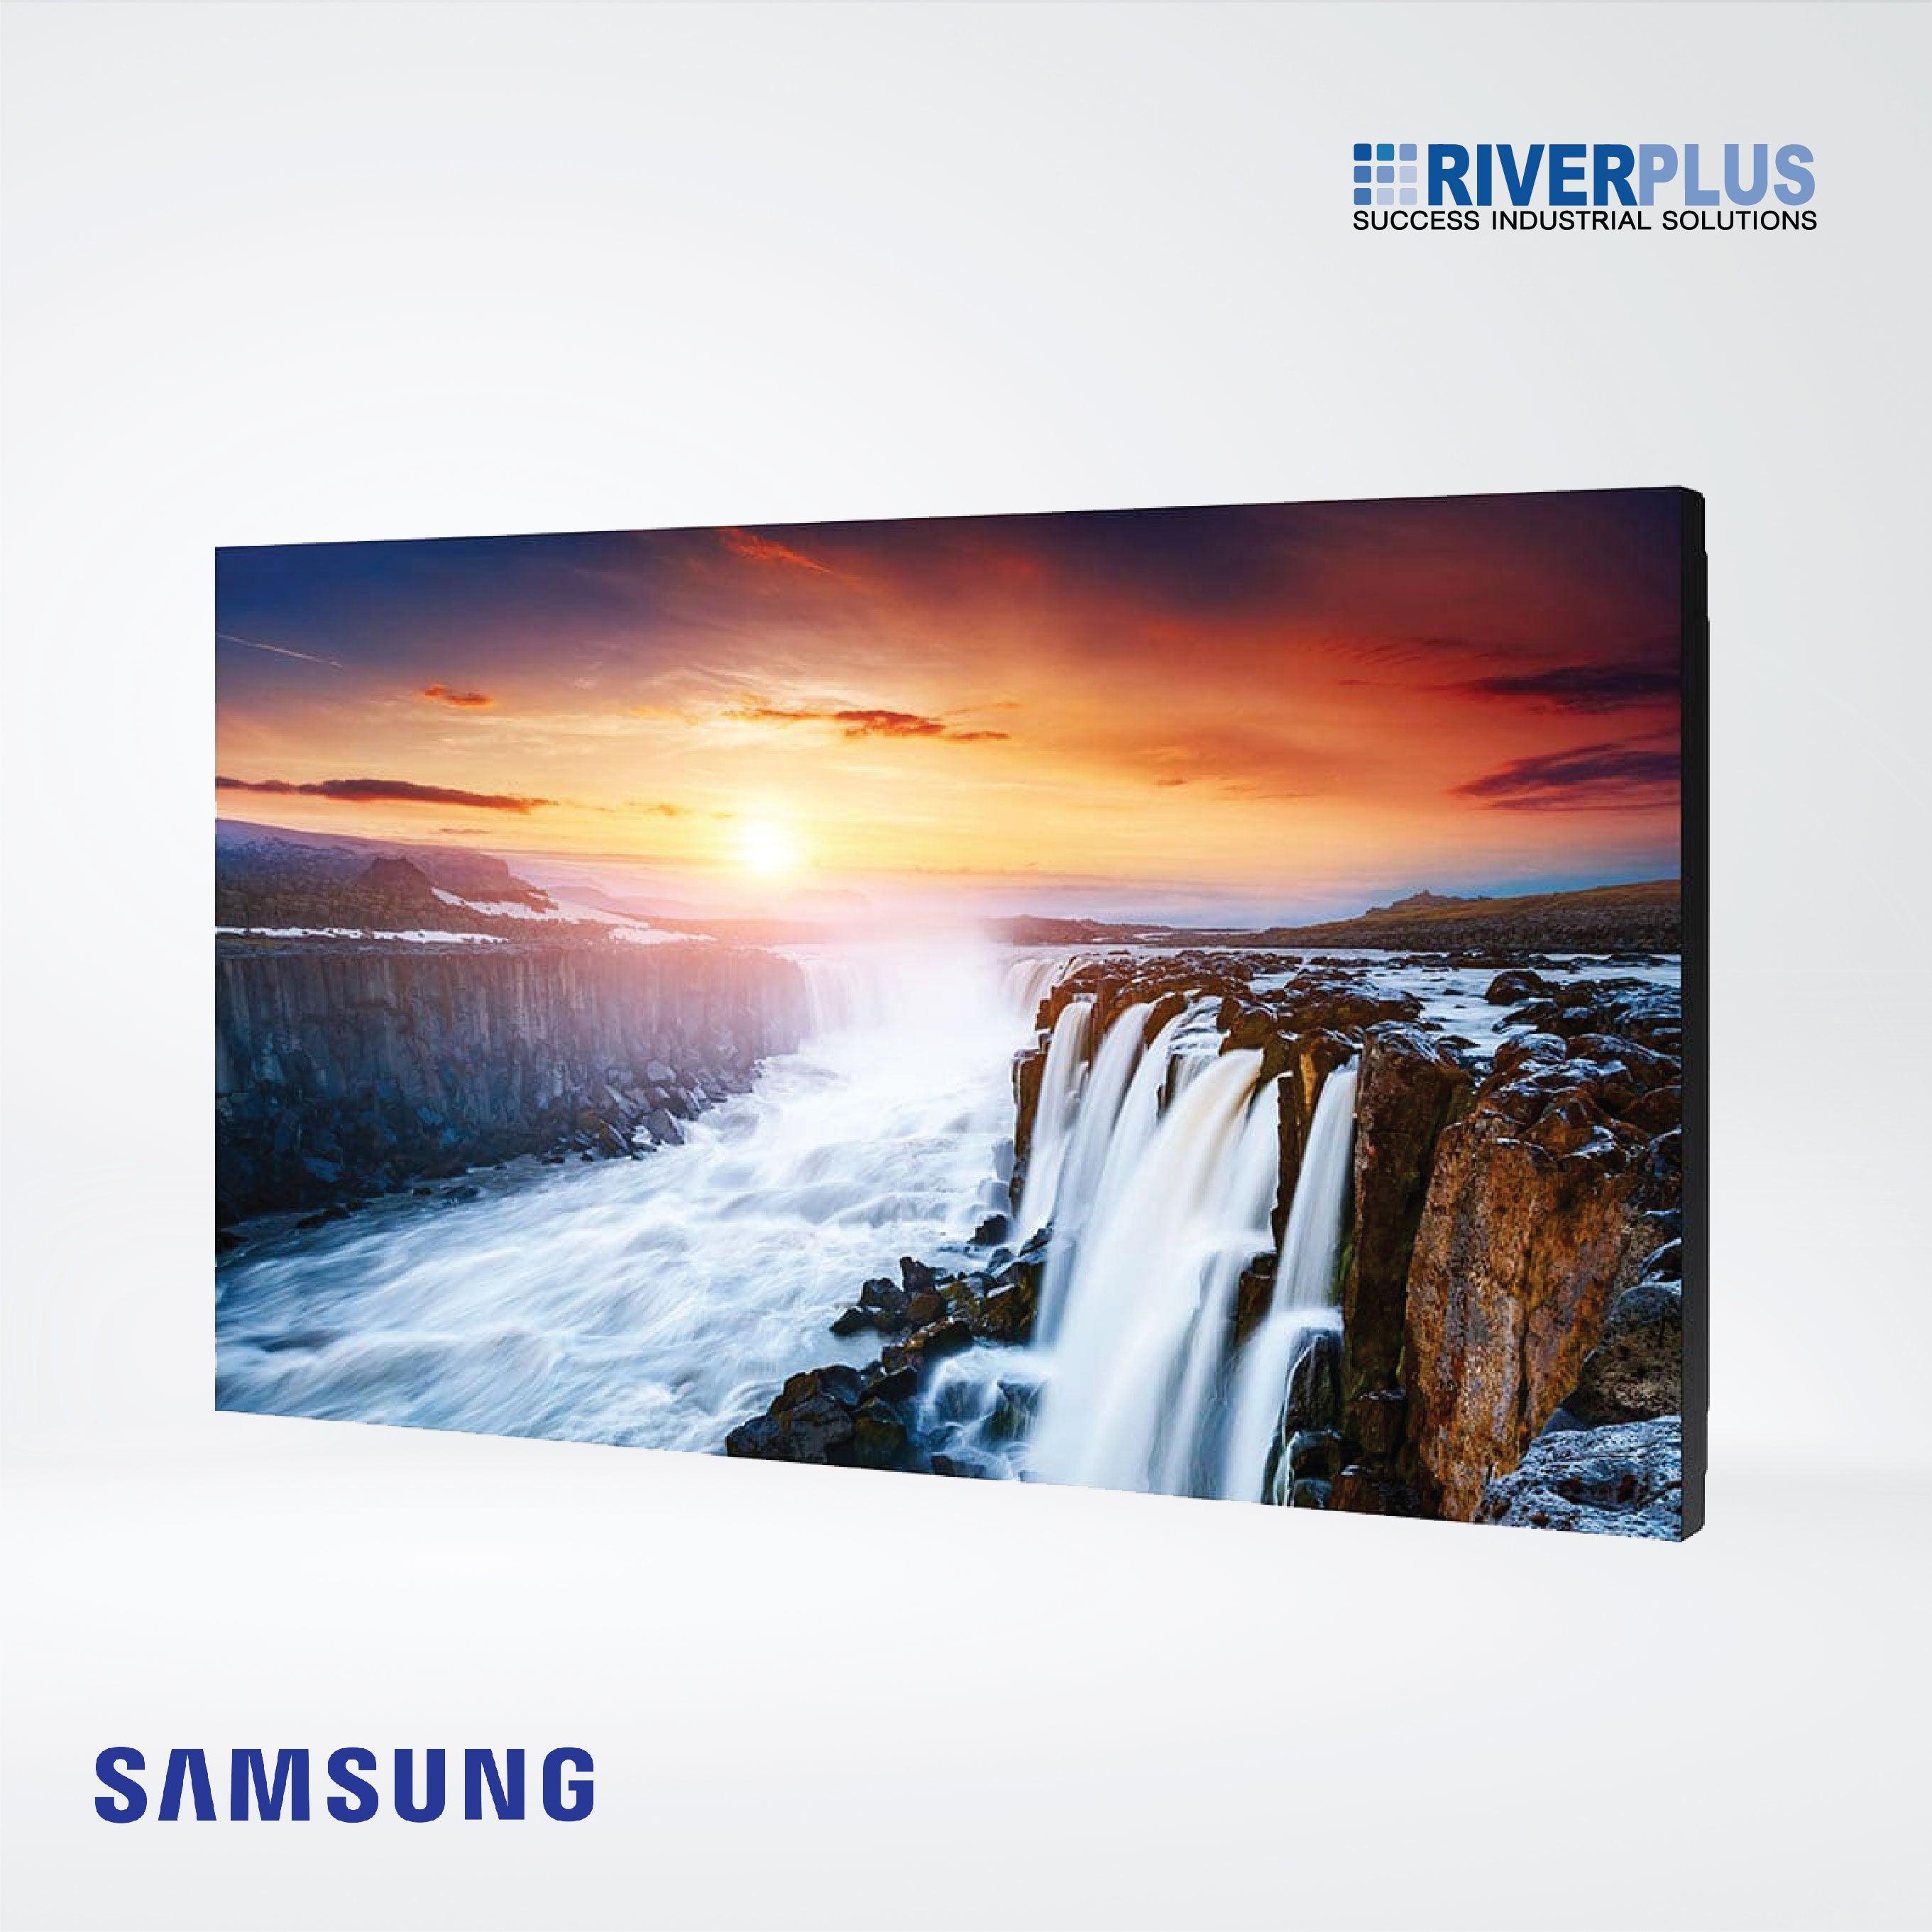 VH55R-R 55" Max 700 nit Always-on, space-saving solution delivering a seamless visual experience - Riverplus